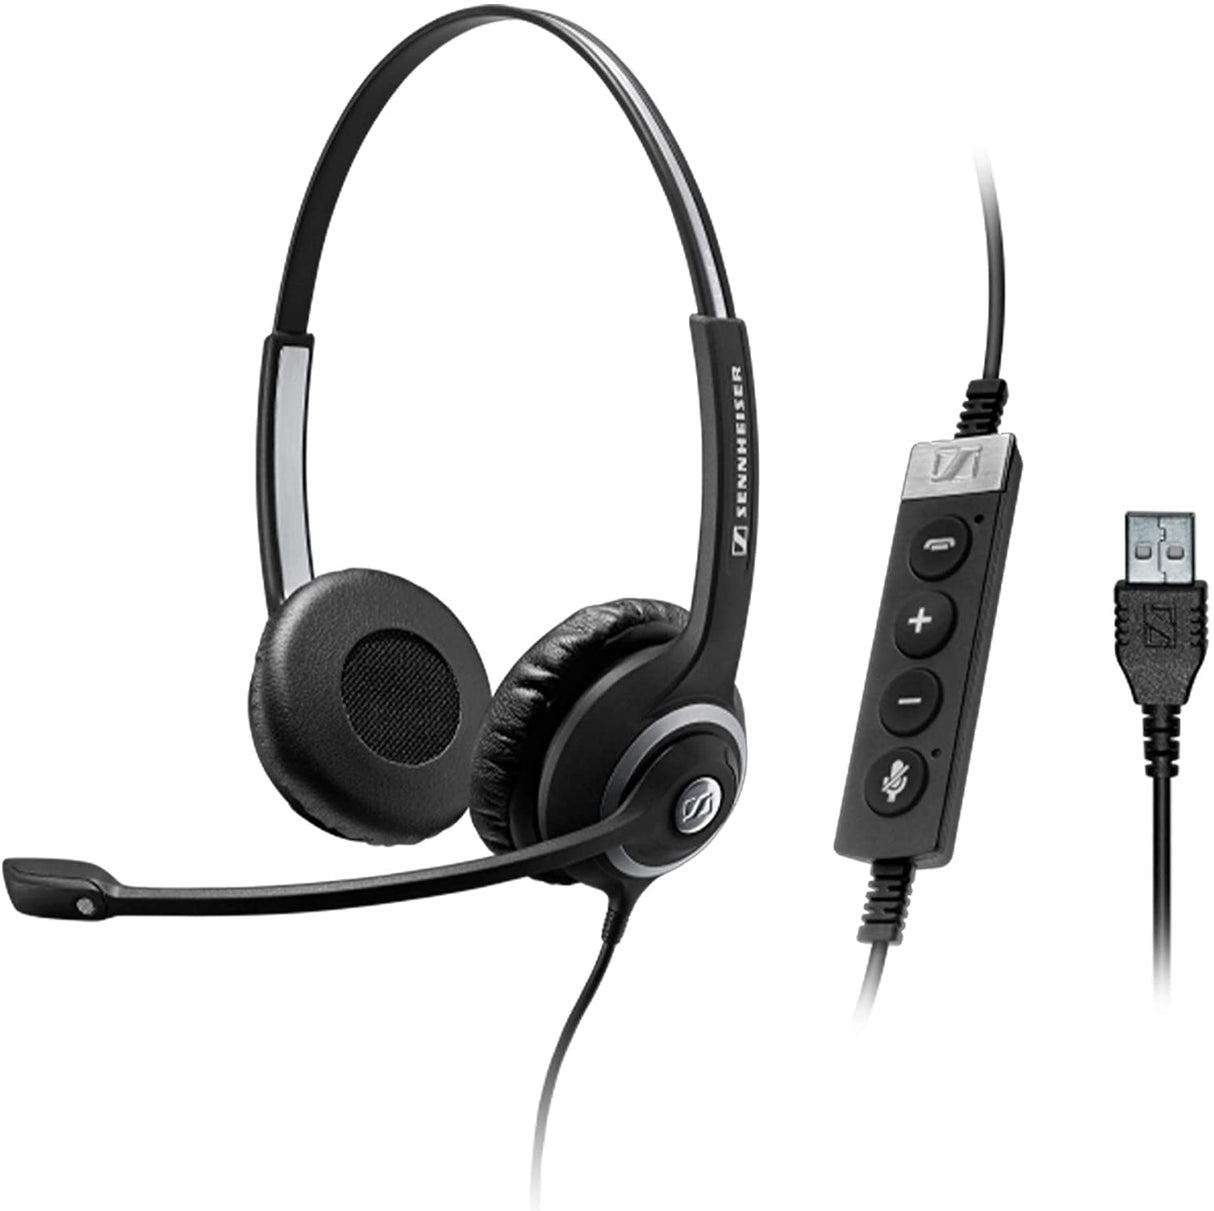 Sennheiser SC 260 USB MS II (506483) - Single-Sided Business Headset | For Skype for Business, Softphone, and PC | with HD Sound, Noise-Cancelling Microphone (Black)